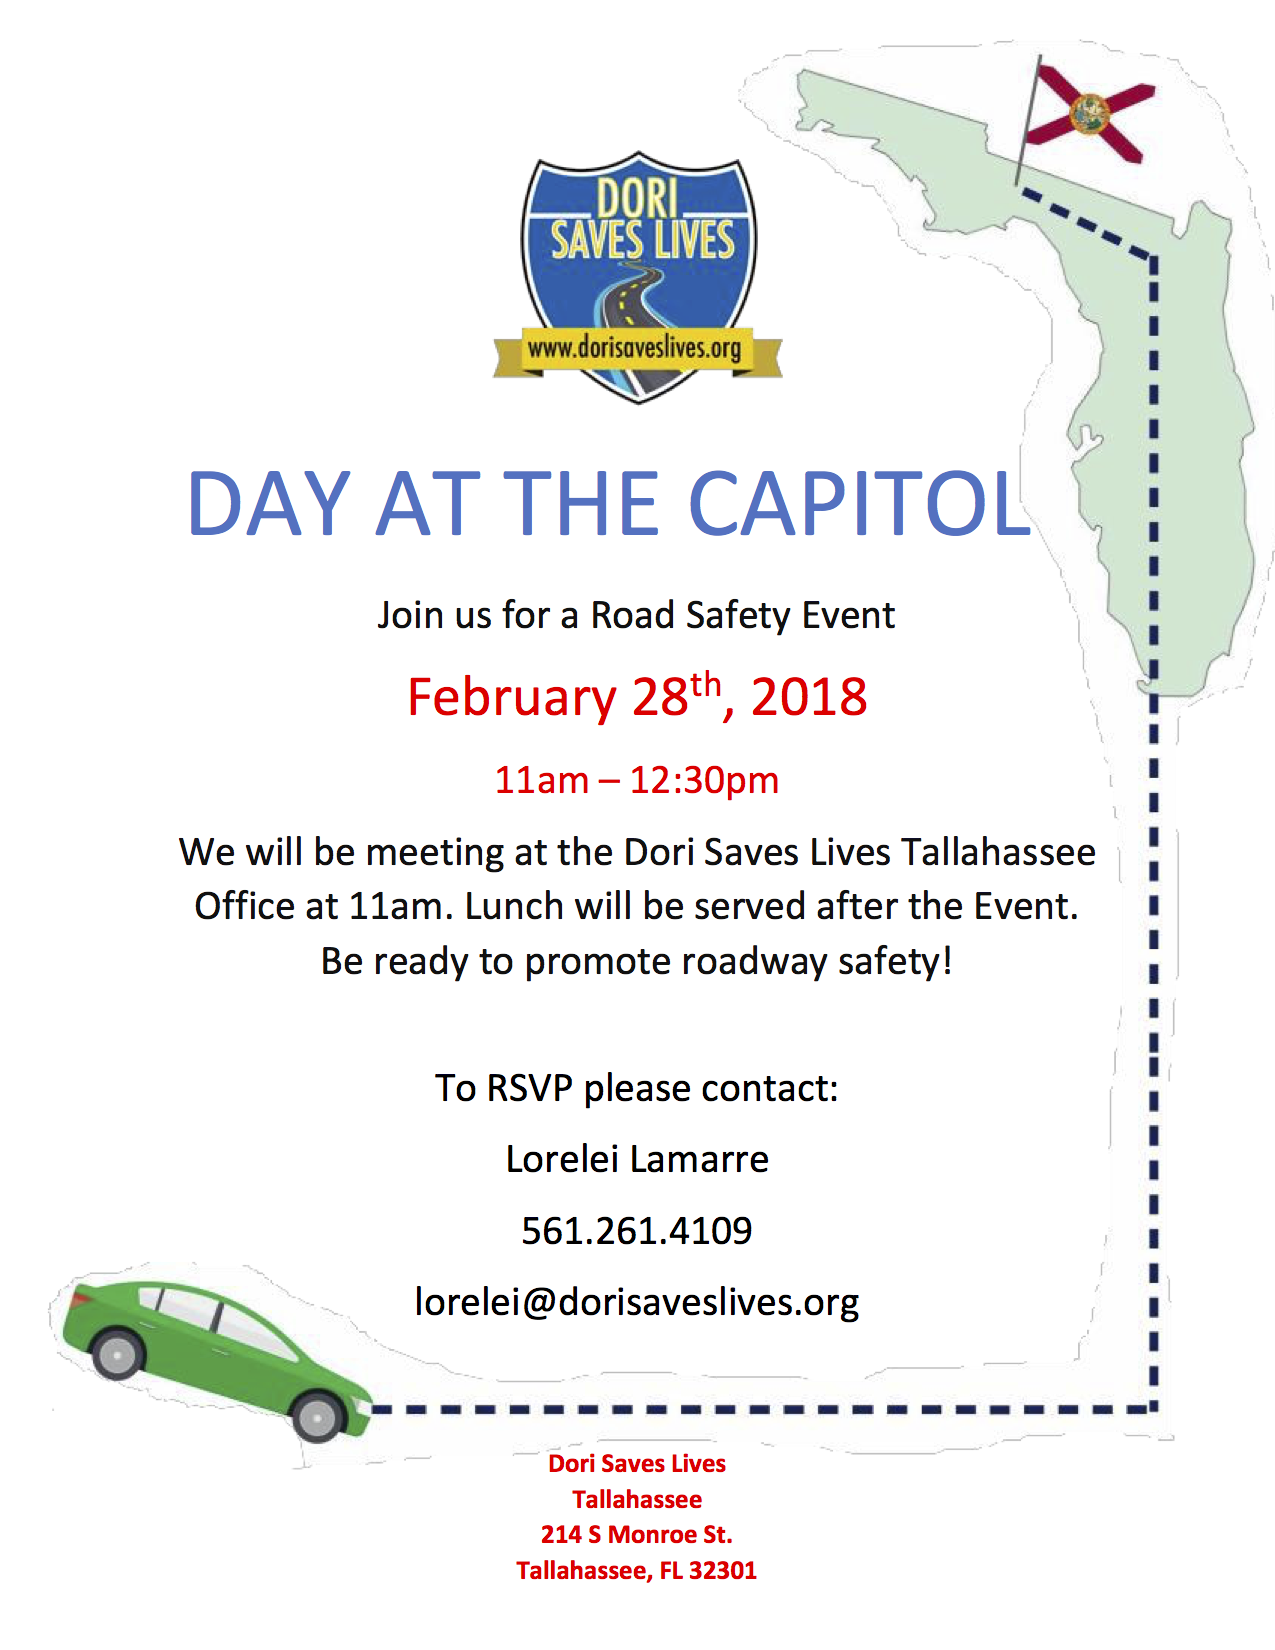 Day at the capitol: February 28, 2018 from 11:00 a.m. - 12:30 p.m.